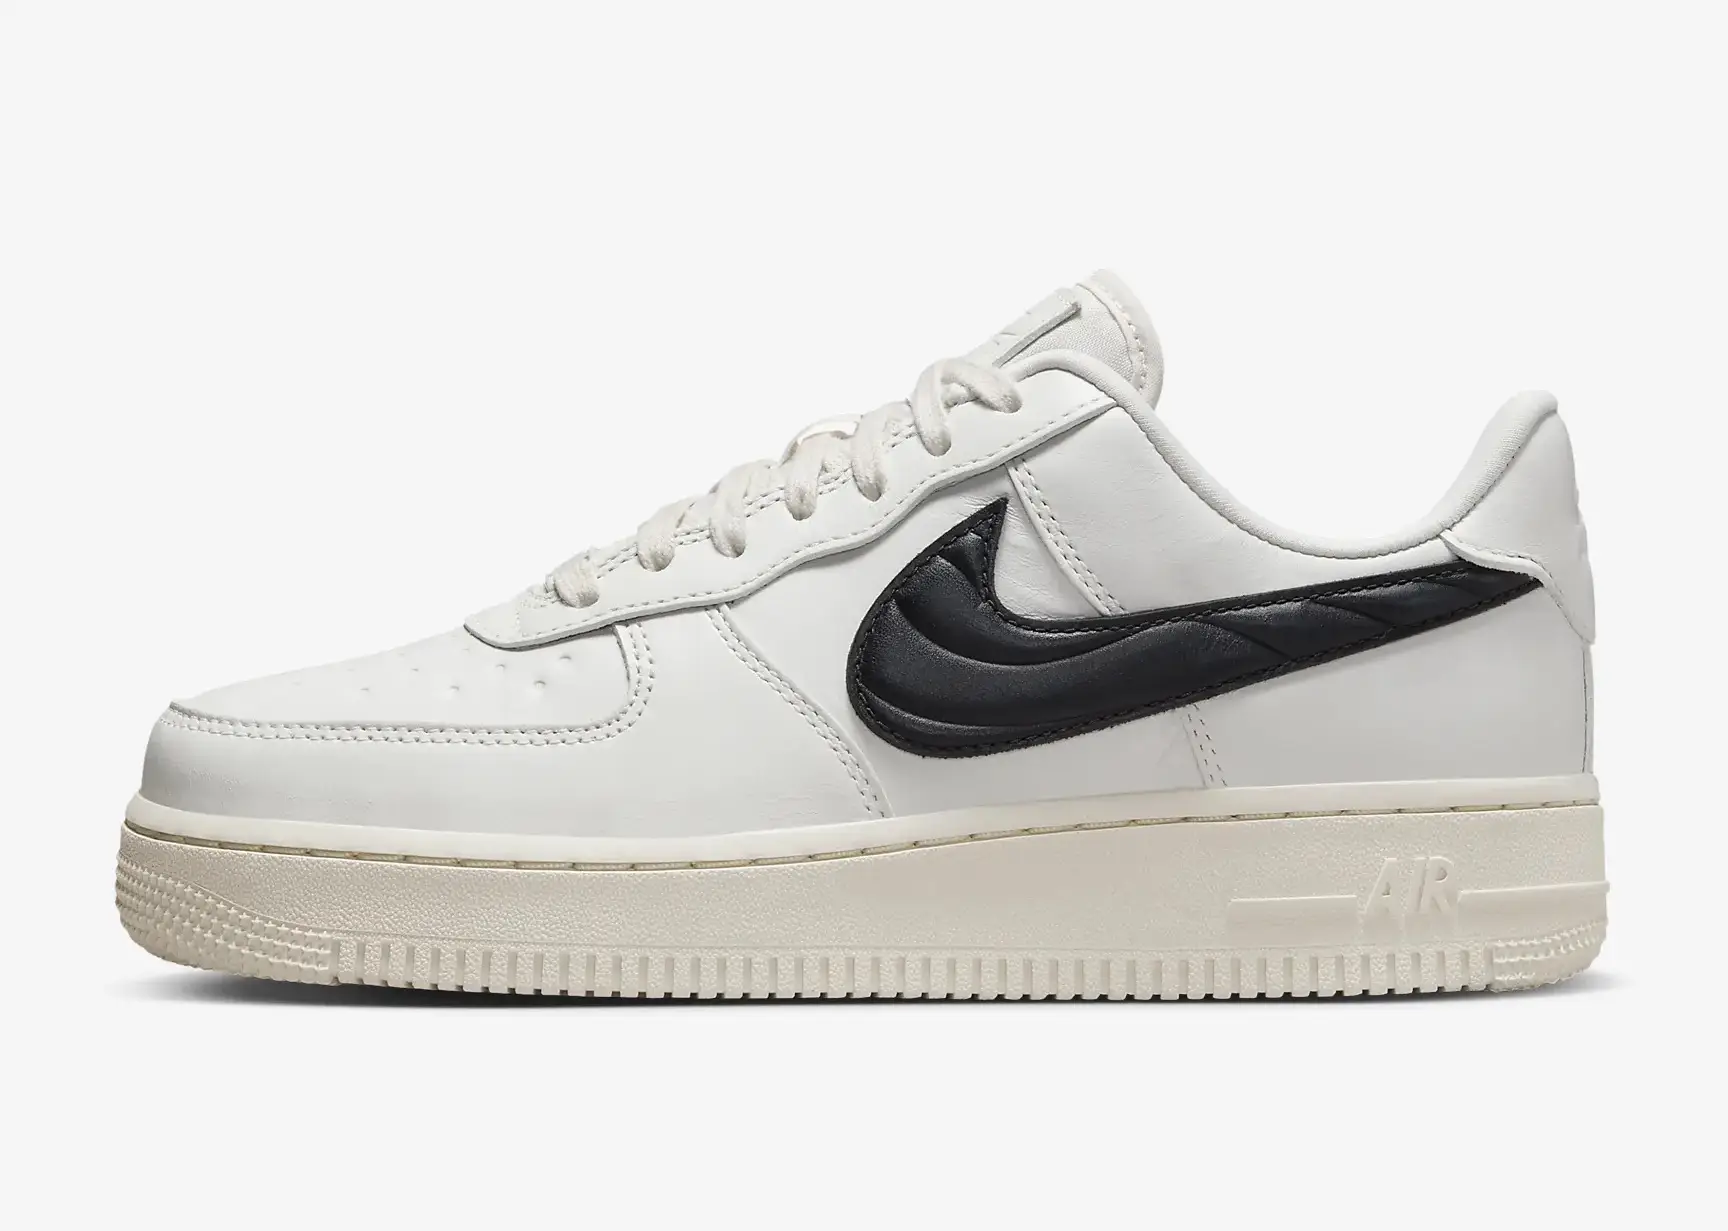 Nike Air Force 1 Sizing: Does the Air Force 1 Fit True to